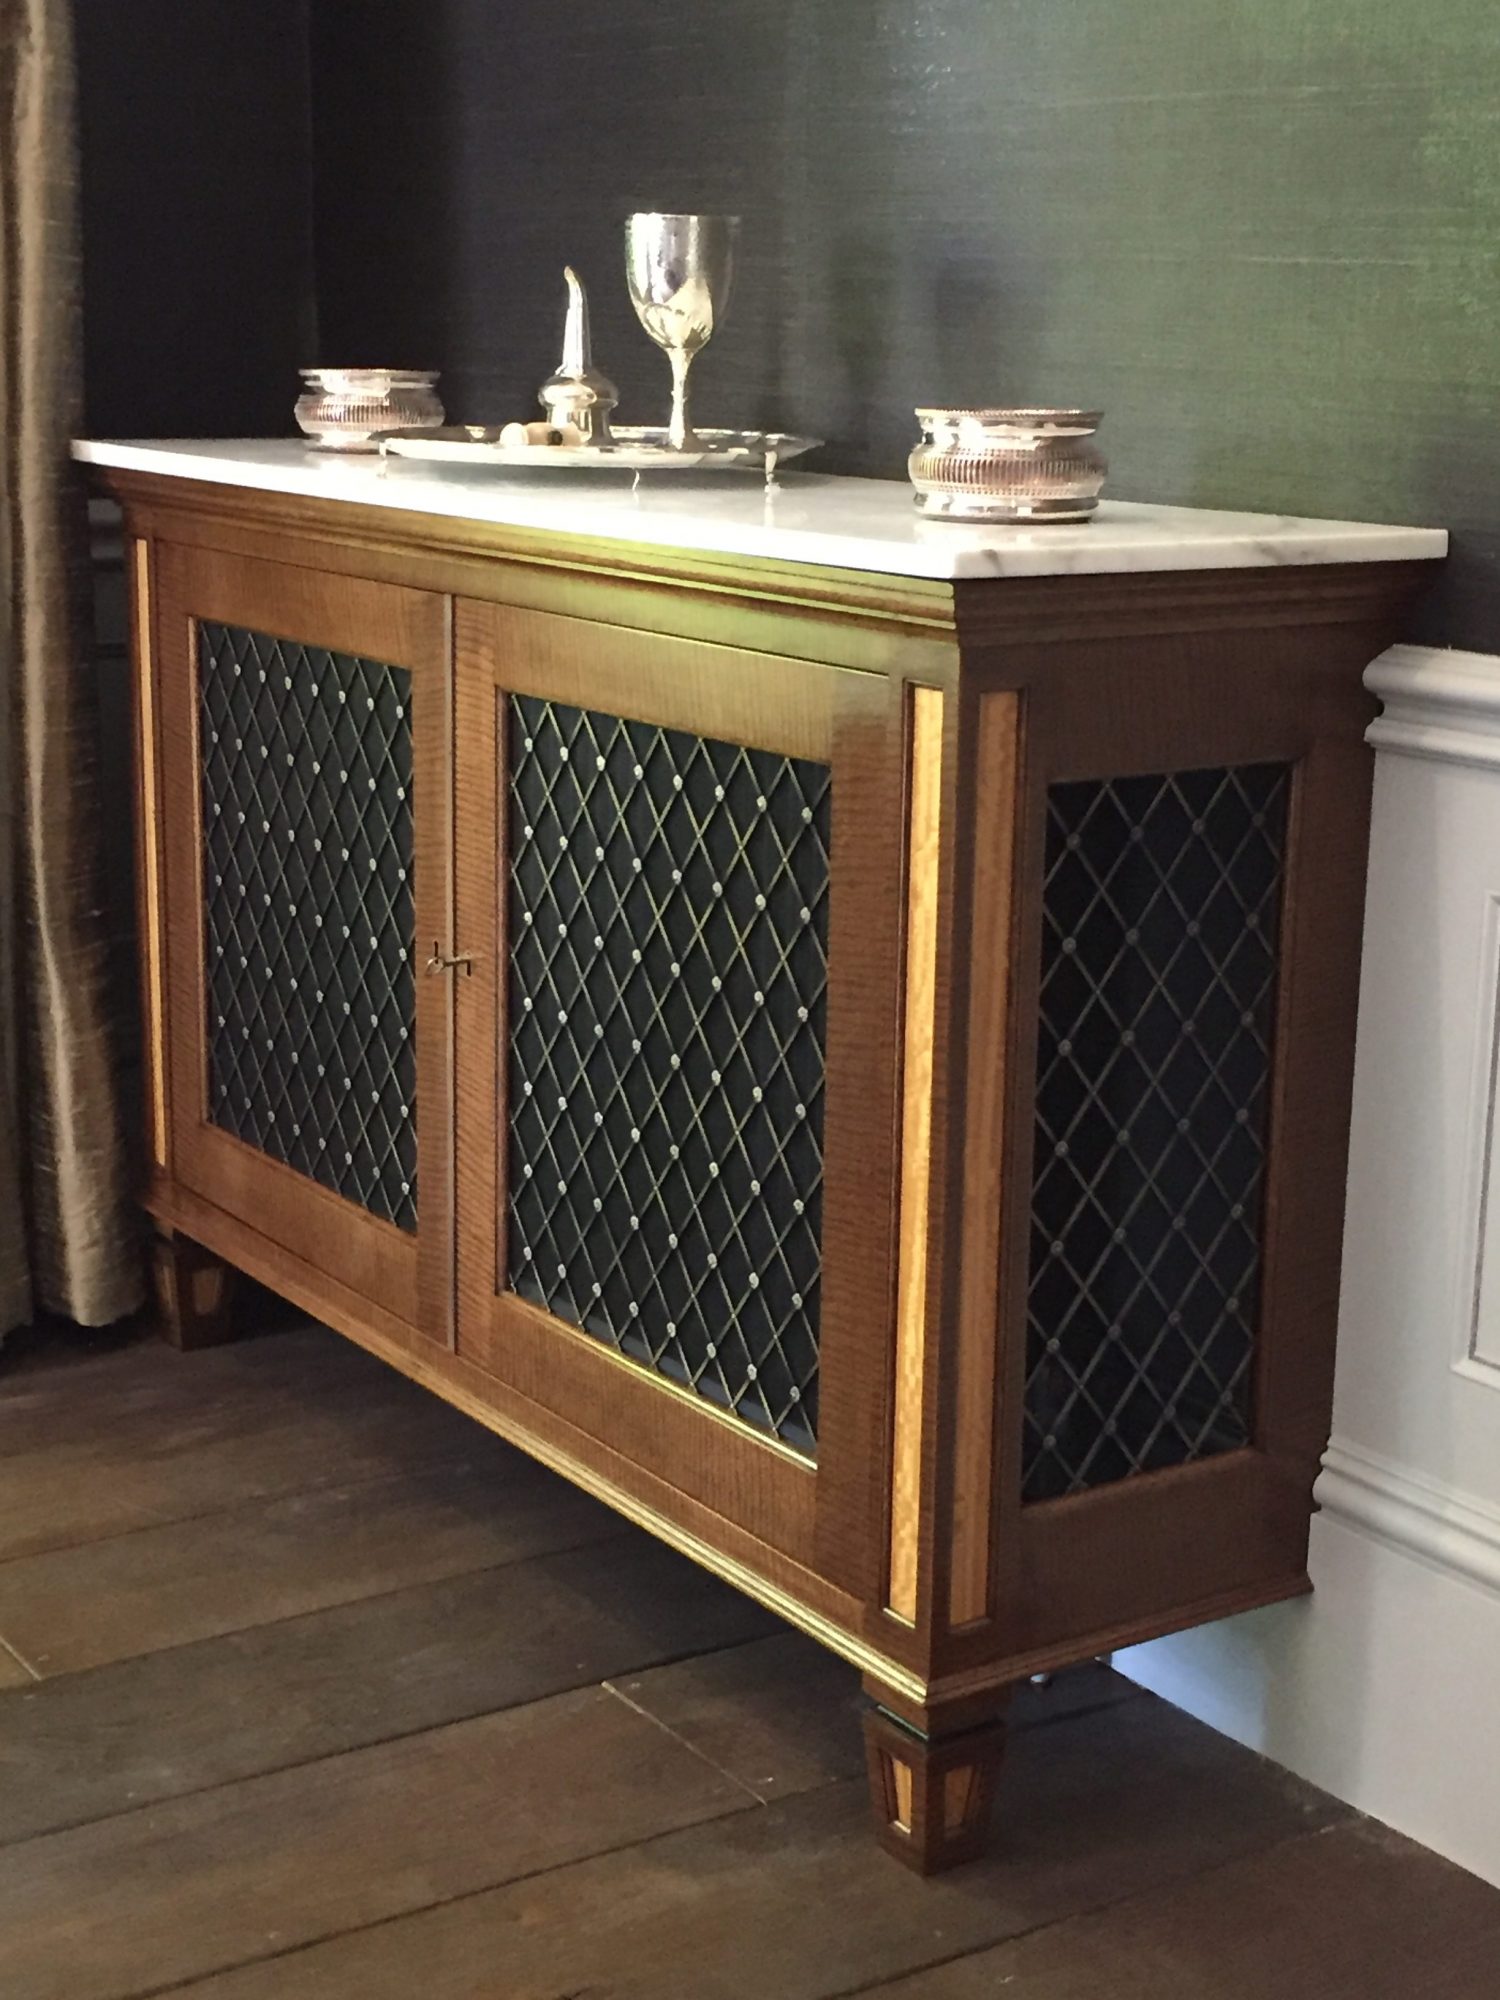 Brass Grilles to Front and Side of Cabinets